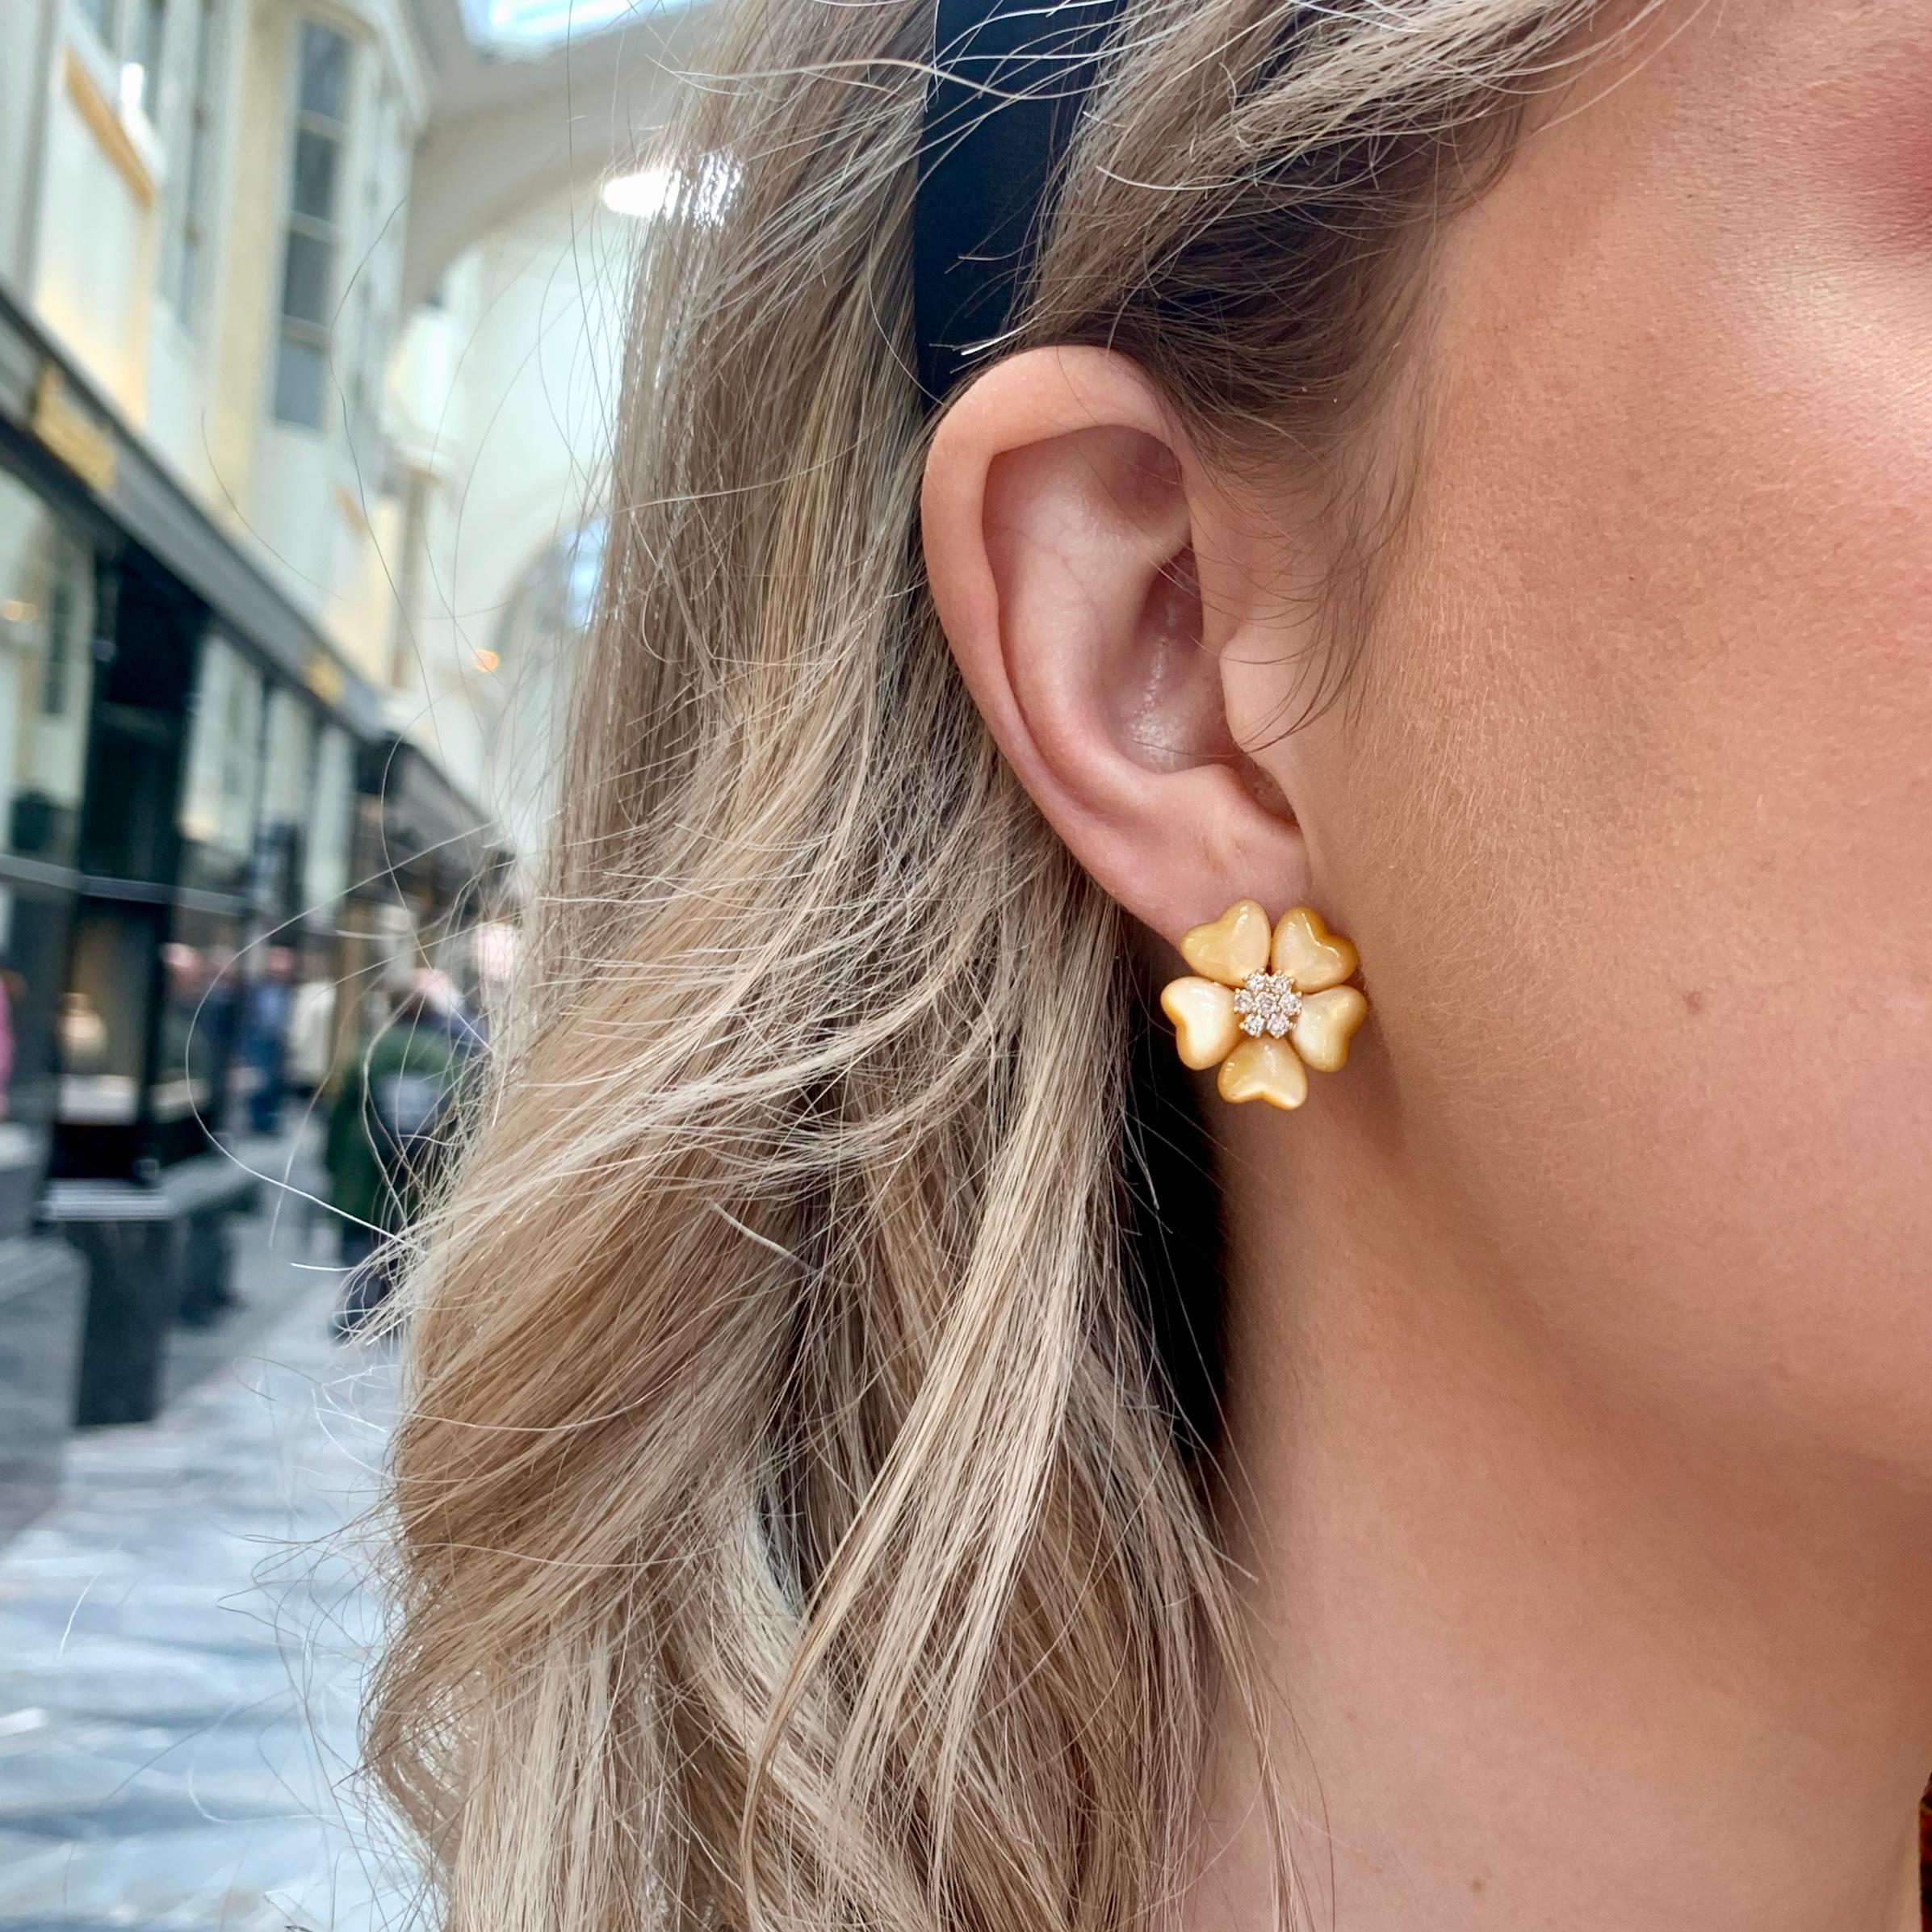 A beautiful pair of vintage diamond and mother of pearl flower earrings set in 18k yellow gold.

The earrings depict an elegant five petaled flower comprised of carved pieces of lustrous mother of pearl. Set centrally is a fine cluster of round